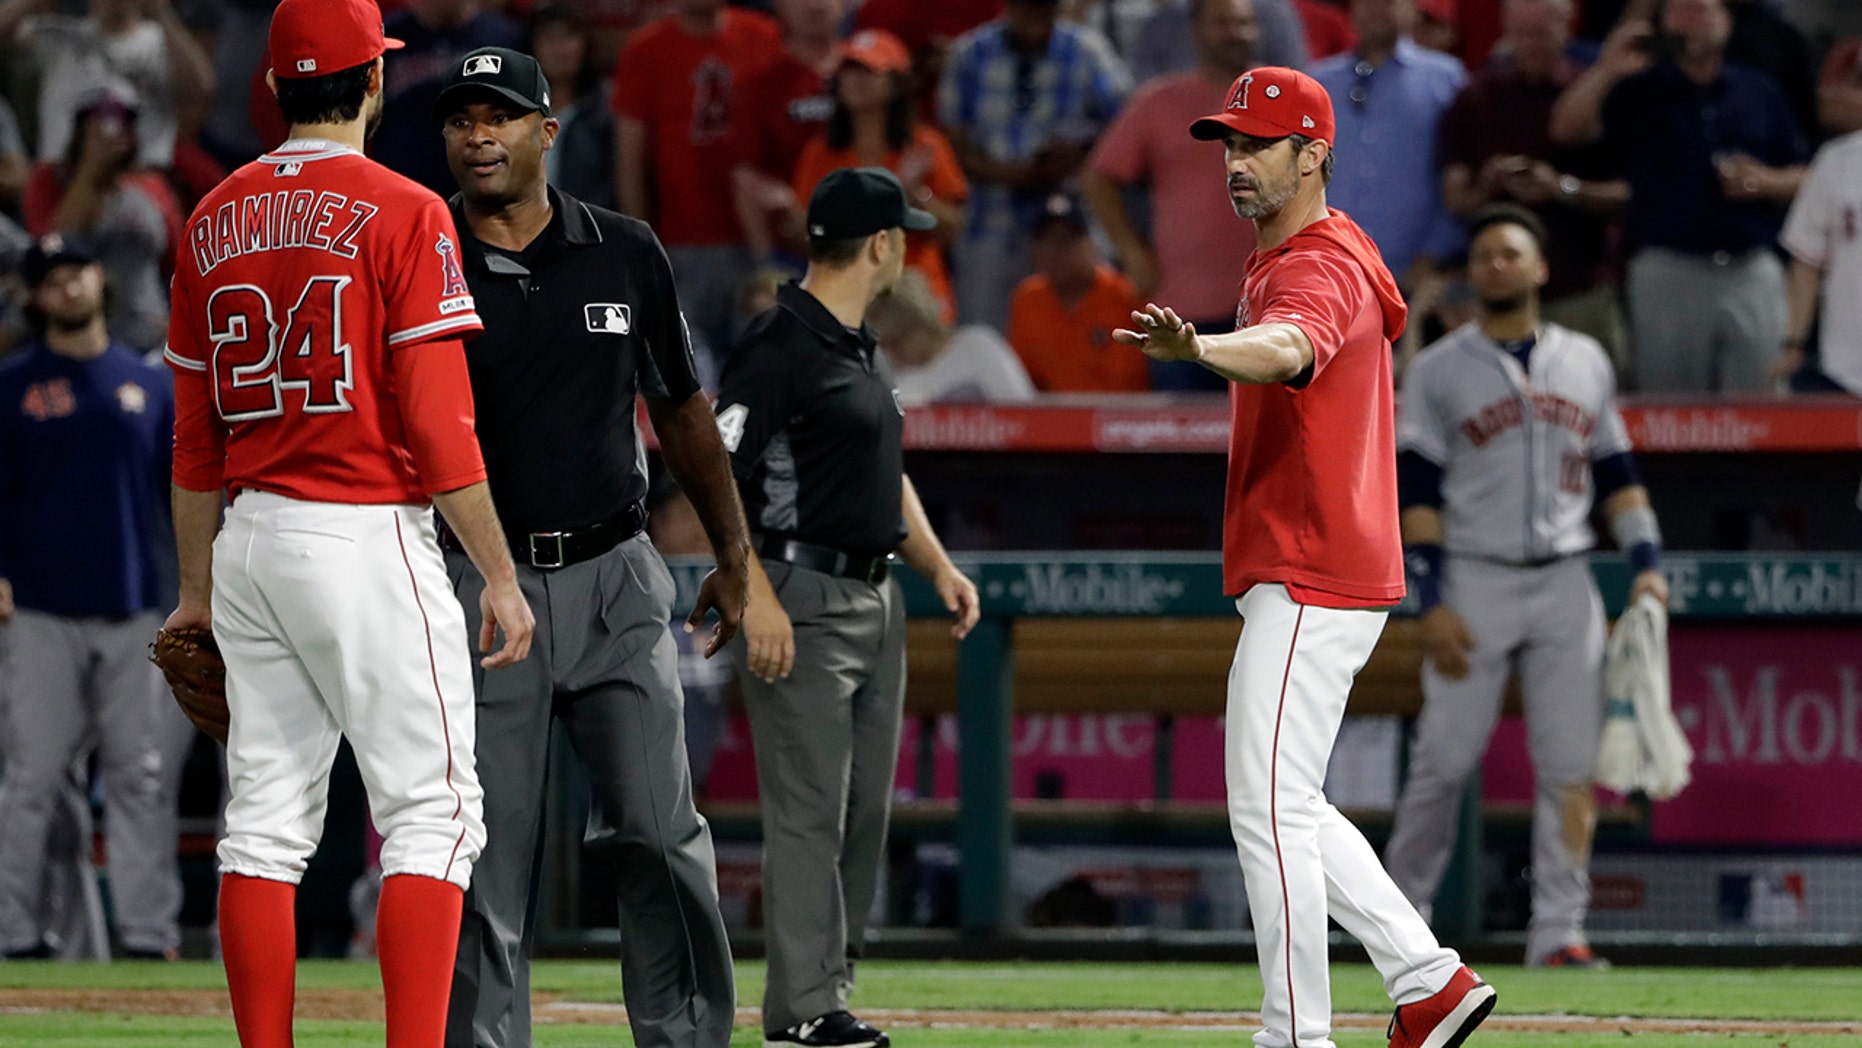 Los Angeles Angels manager Brad Ausmus right, gestures to pitcher Noe Ramirez (24) after Ramirez hit Houston Astros' Jake Marisnick with a pitch during the sixth inning of a baseball game Tuesday, July 16, 2019, in Anaheim, Calif. (AP Photo/Marcio Jose Sanchez)